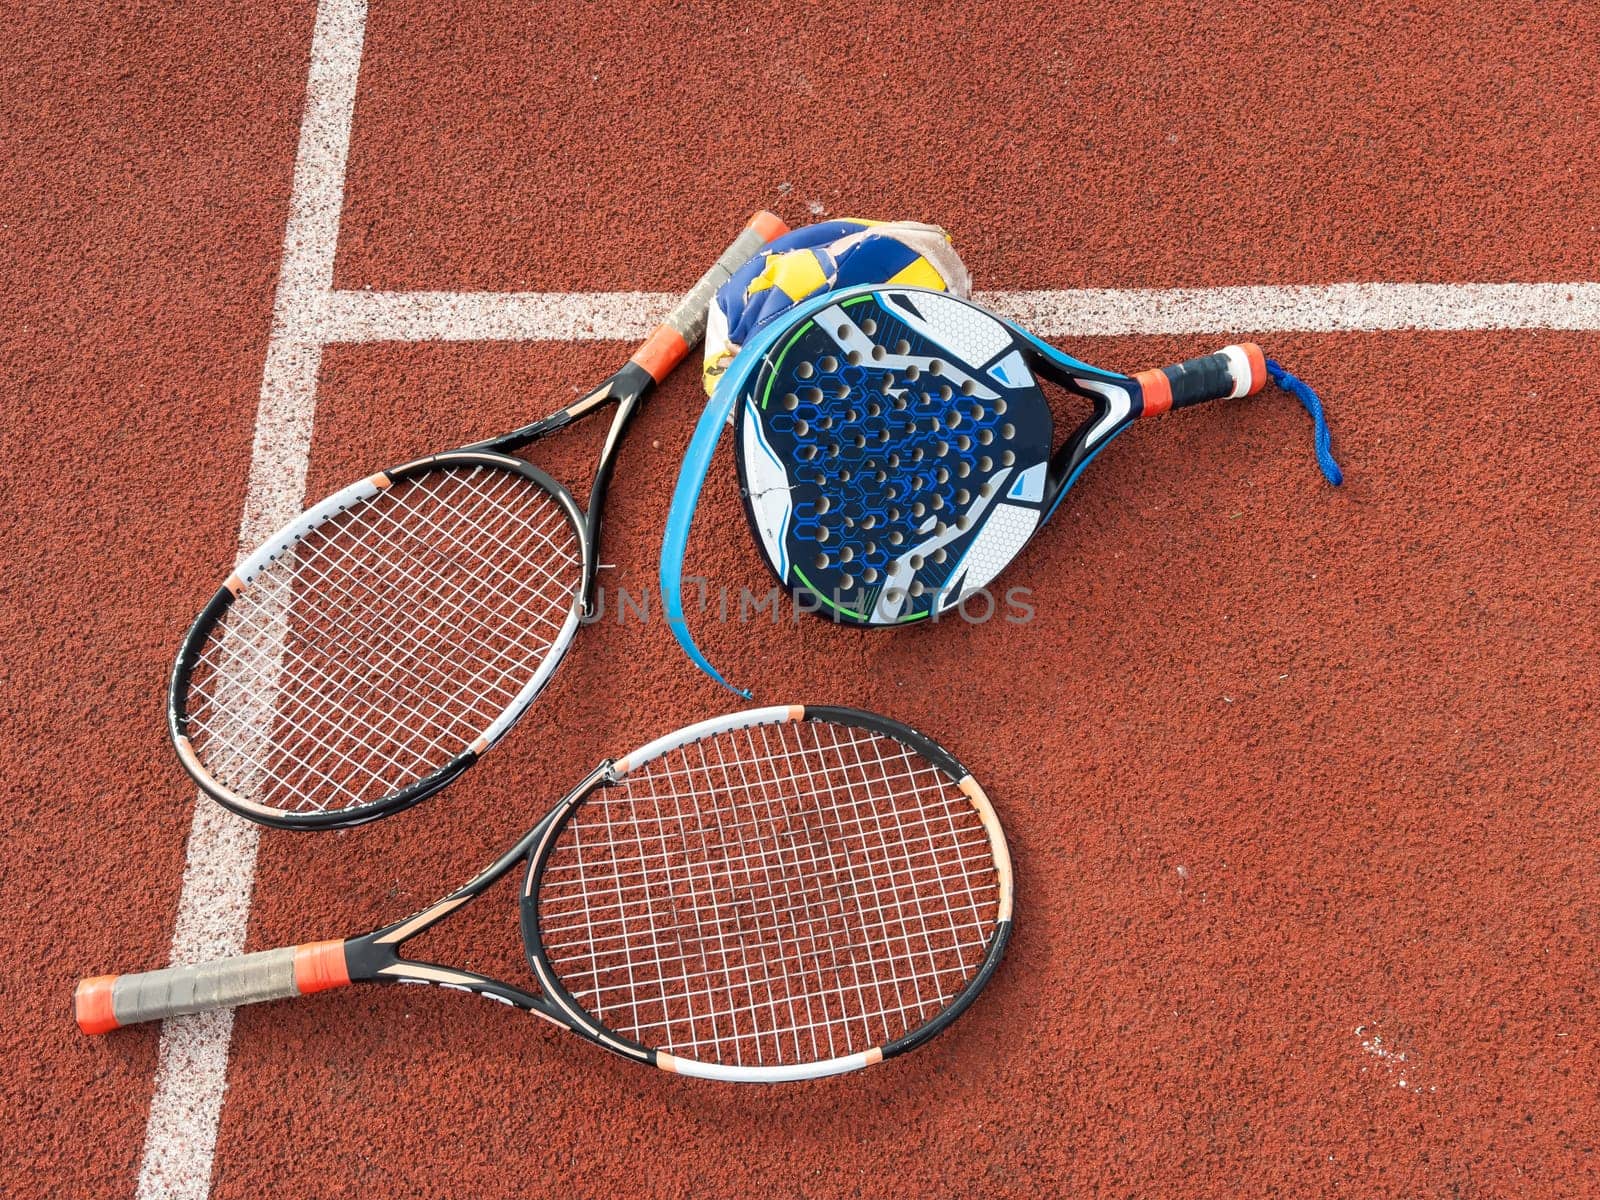 The broken rackets for playing tennis are hanging on the wall of a sports tennis club. . High quality photo